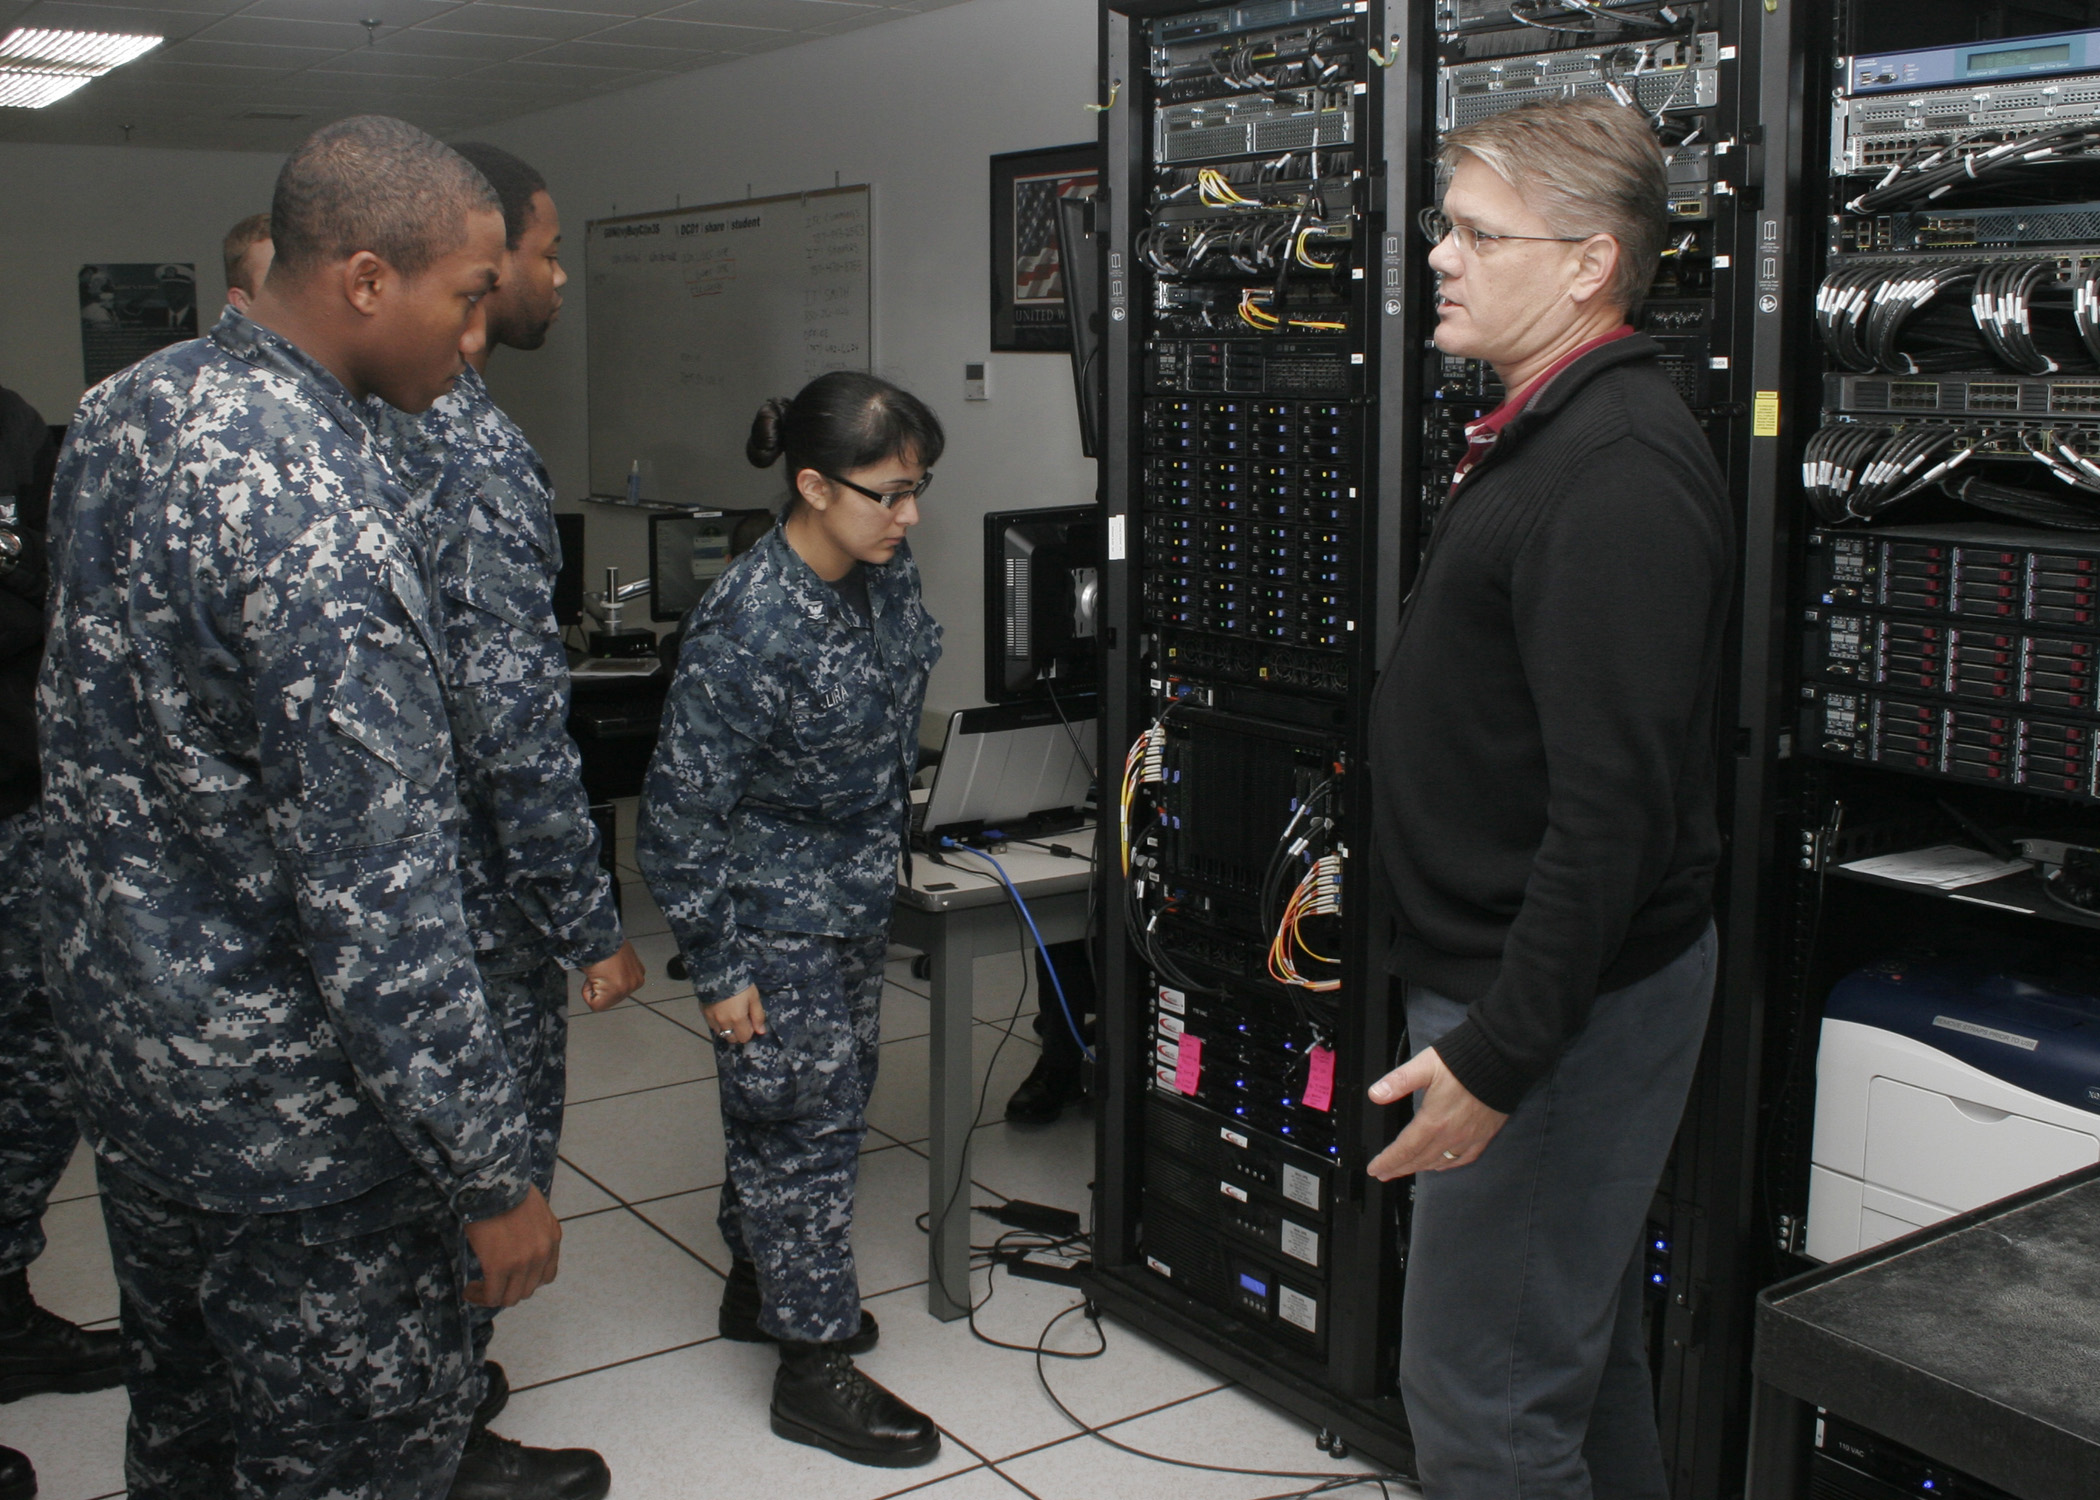 Instructor John Carver demonstrates how to identify components of the Consolidated Afloat Networks and Enterprise Services (CANES) system during CANES "C" school at Information Warfare Training Command (IWTC) Virginia Beach. U.S. Navy photo by Petty Officer 2nd Class Jay Teerlink.